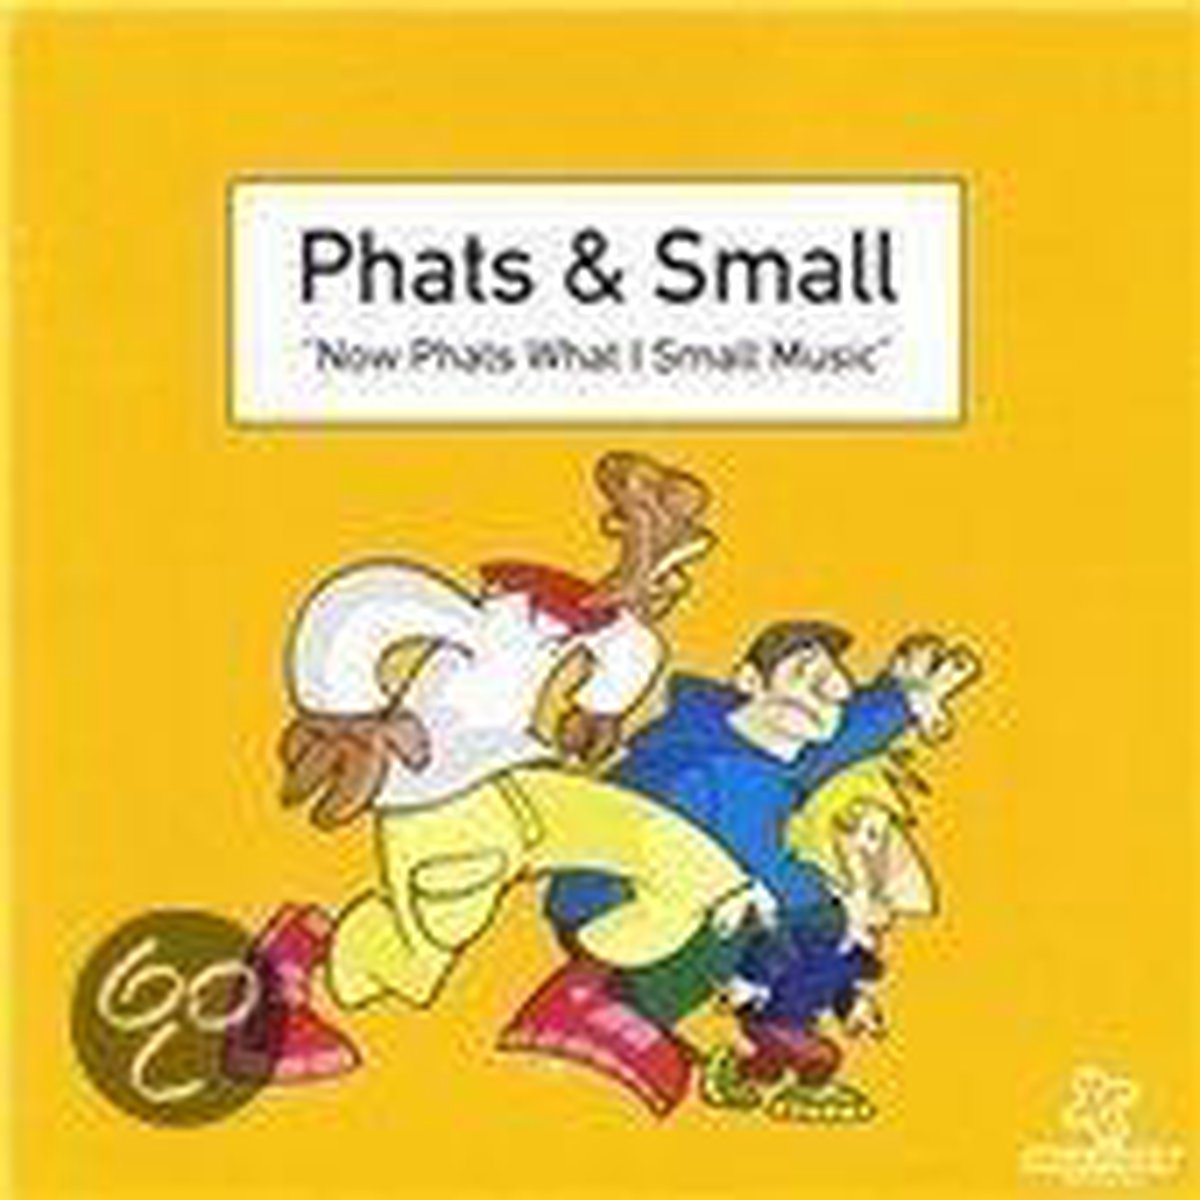 Phats & Small - Now Phats What I Small Music - Phats & Small